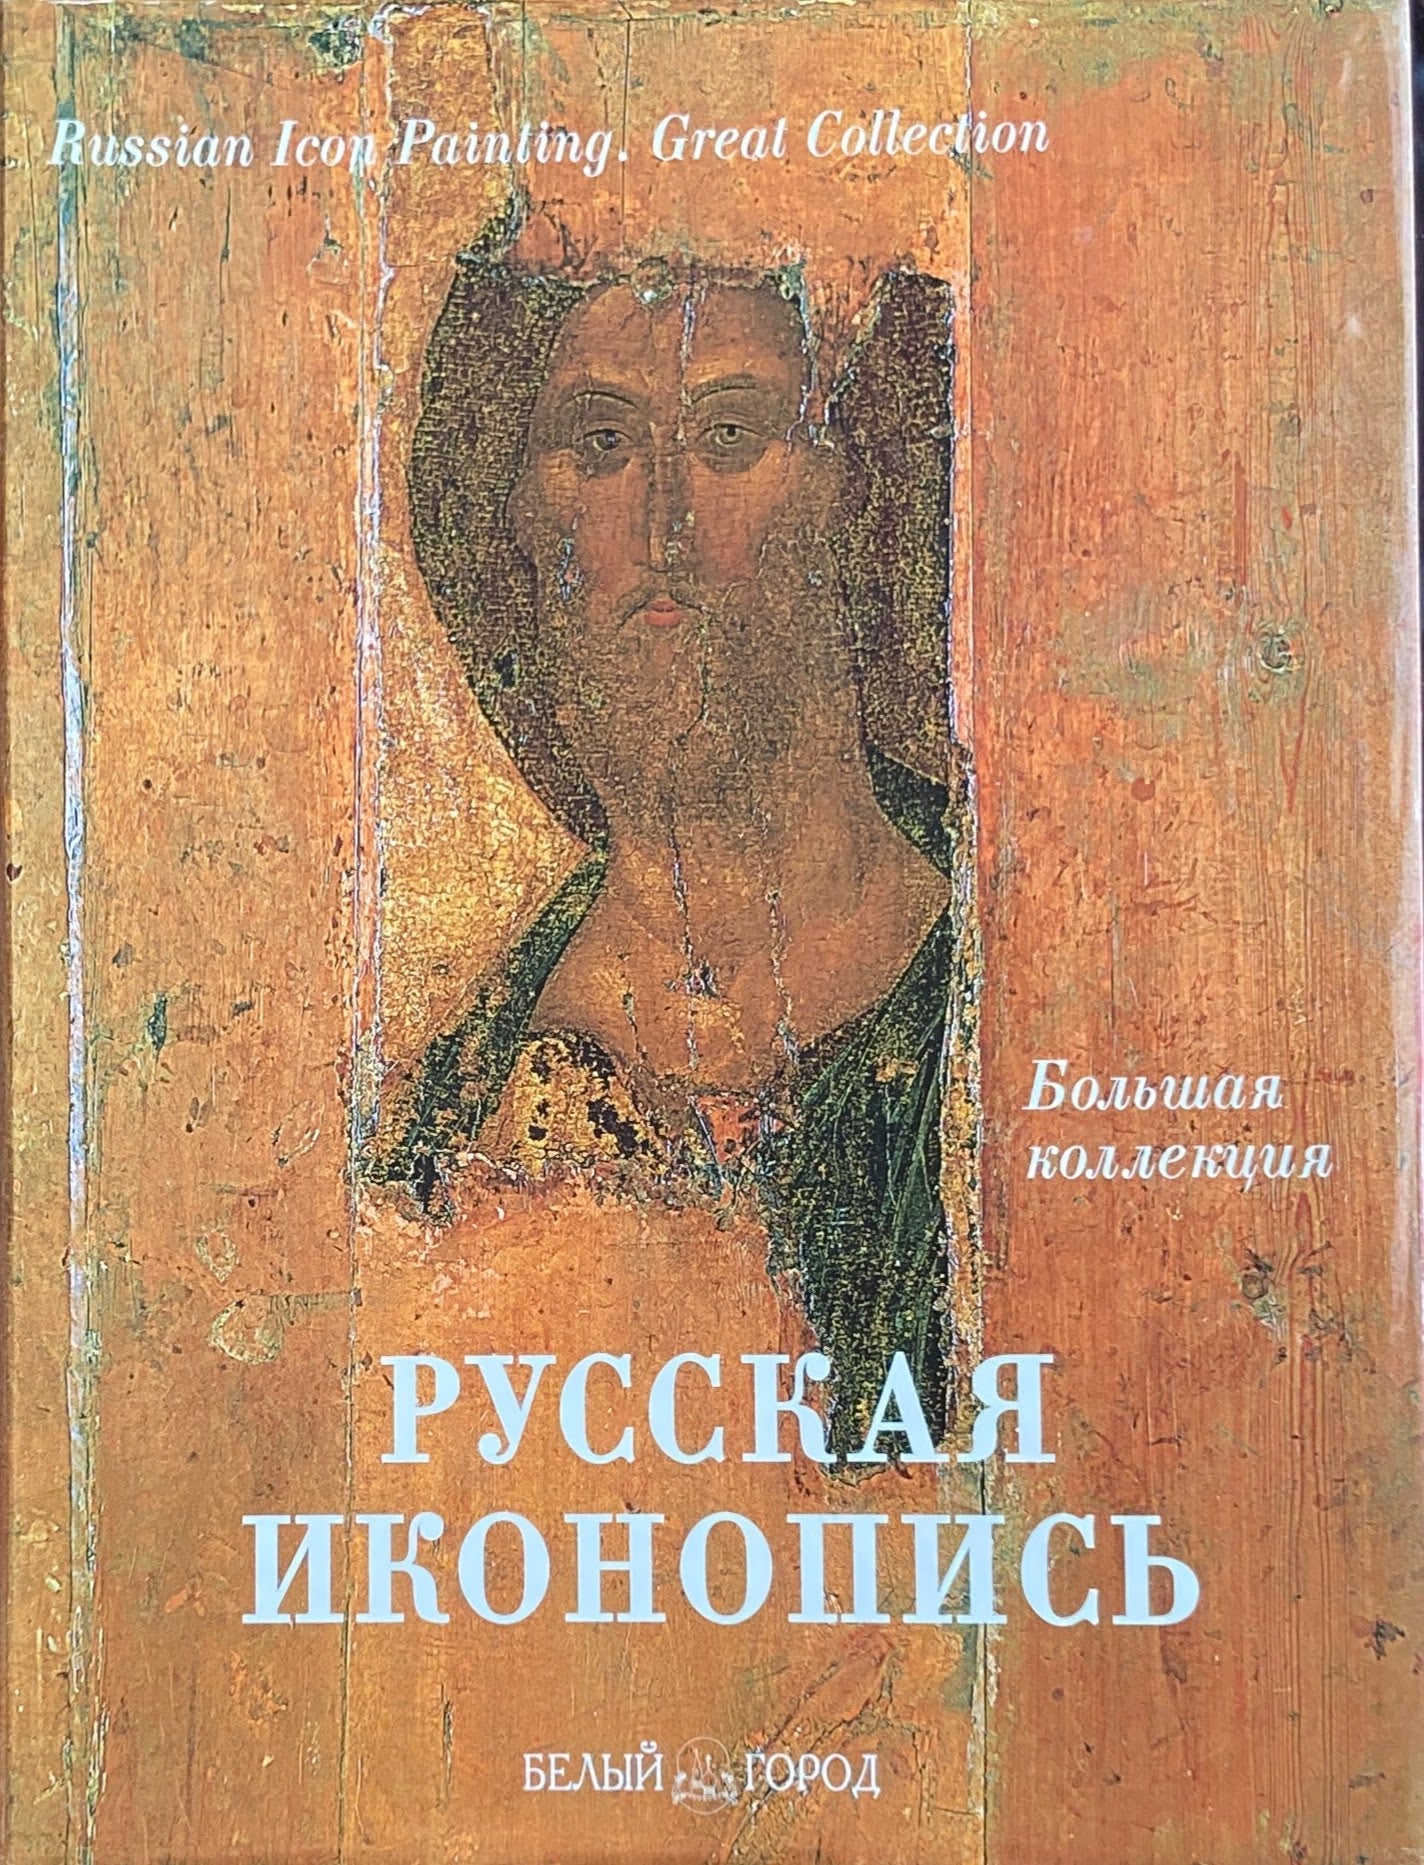 Russian Icon Painting 　Great Collection　Evgenii Troubetzkoy